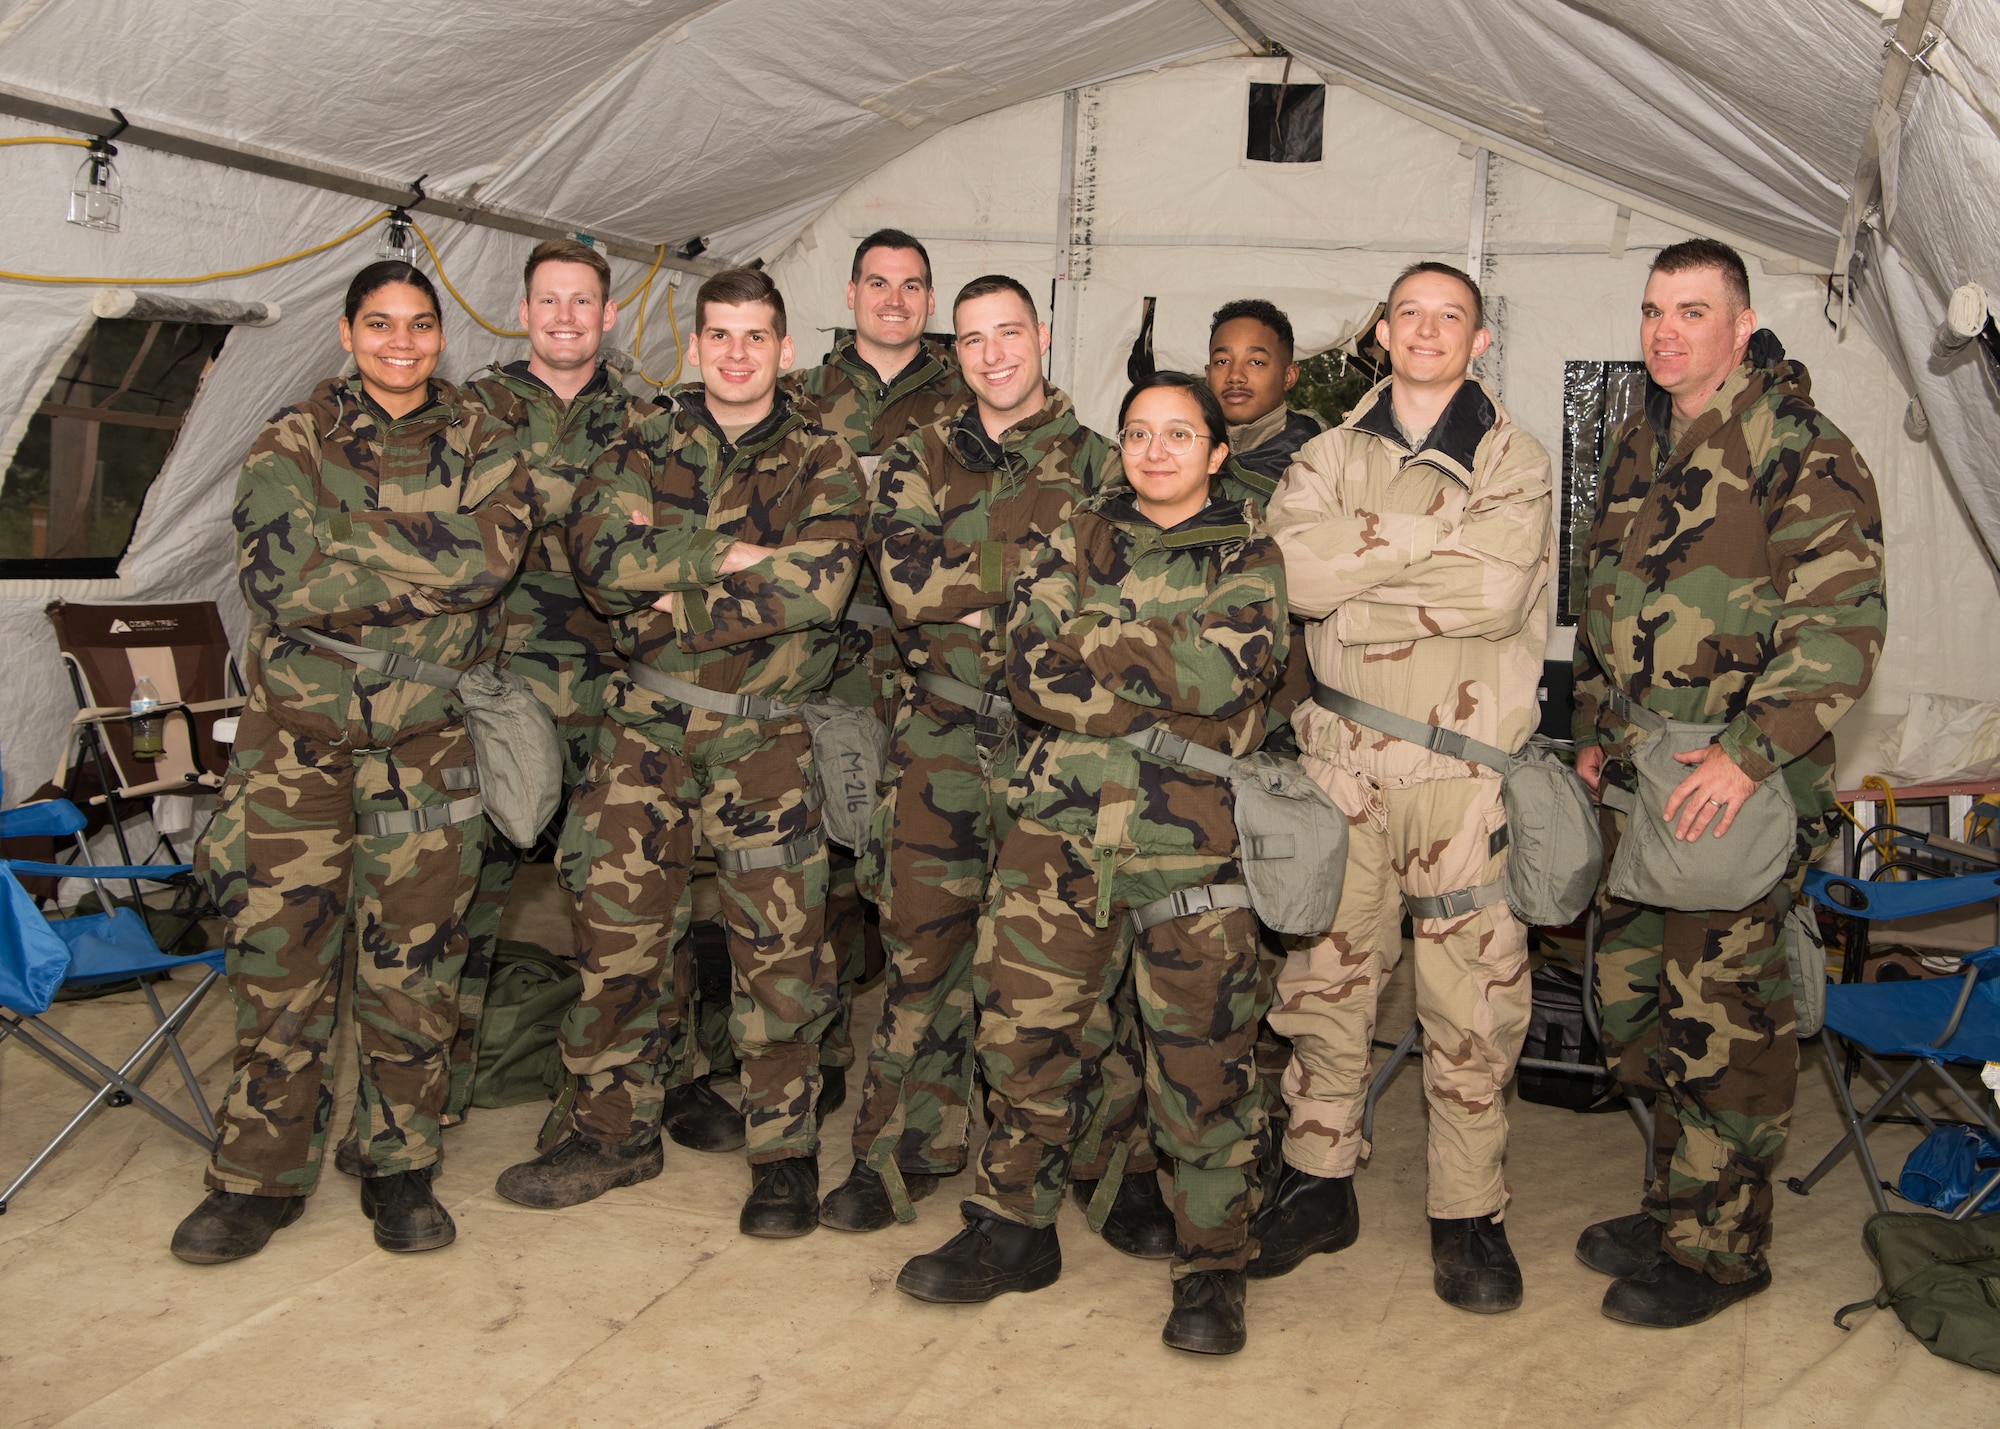 Team “Scott’s tots”, made up of 509th Contracting Squadron Airmen, stands for a photo during a mock deployment exercise, Oct. 9, 2019, at Whiteman Air Force Base, Missouri. The team competed with the ‘DeceptiCONS’, another 509th CONS team, as regional contracting offices throughout the notional mobilization to Mogadishu, Somalia. (U.S. Air Force photo by Airman 1st Class Parker J. McCauley)